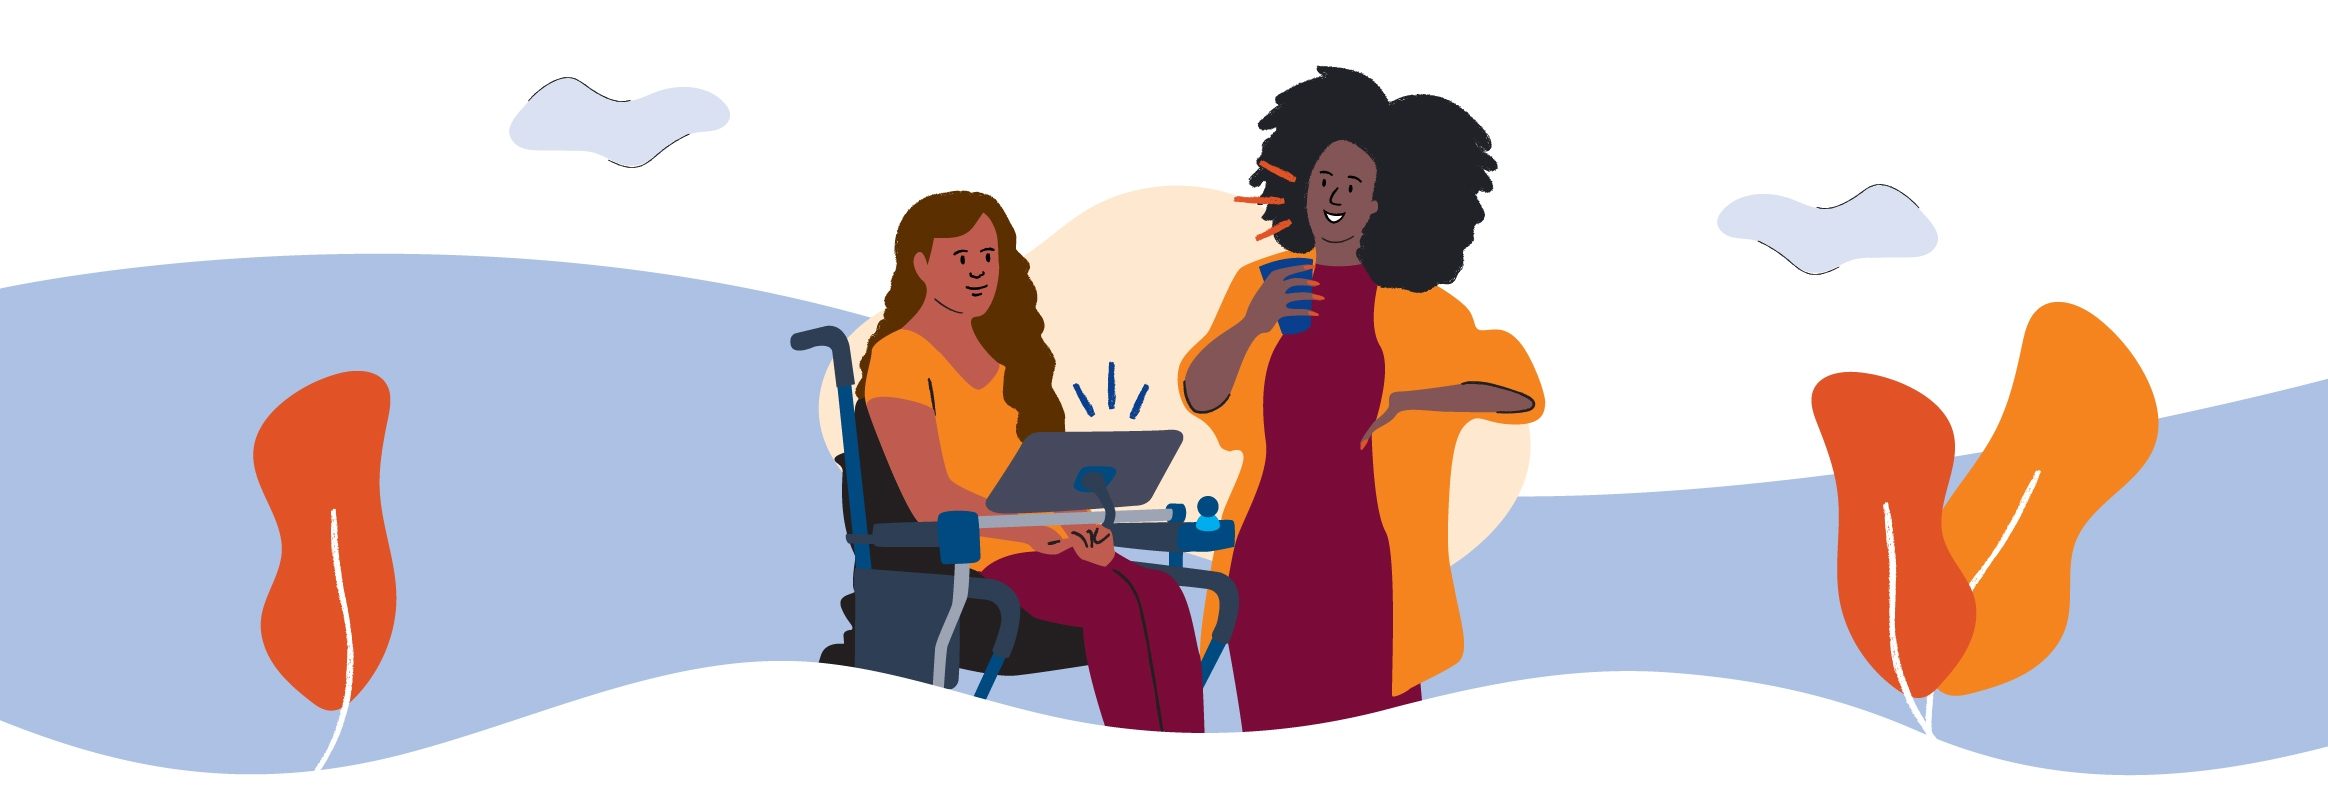 Two black women talking. One is in wheel chair using an iPad to talk. The other one is standing, chatting with the wheelchair user and holding a cup